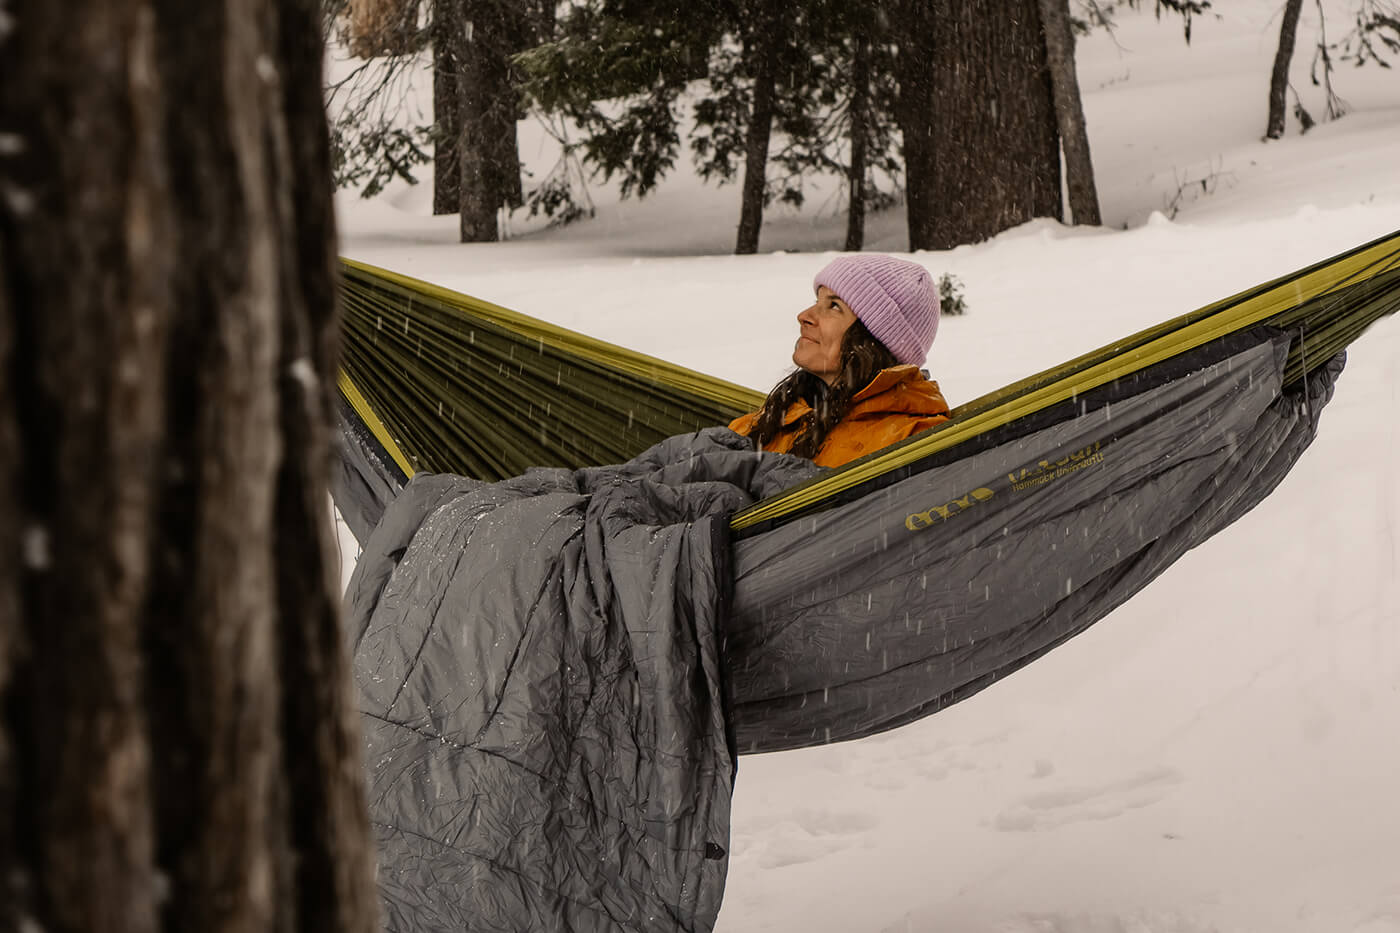 A woman sits in her ENO Hammock with the Vulcan and Vesta insulation keeping her warm on a snowy day